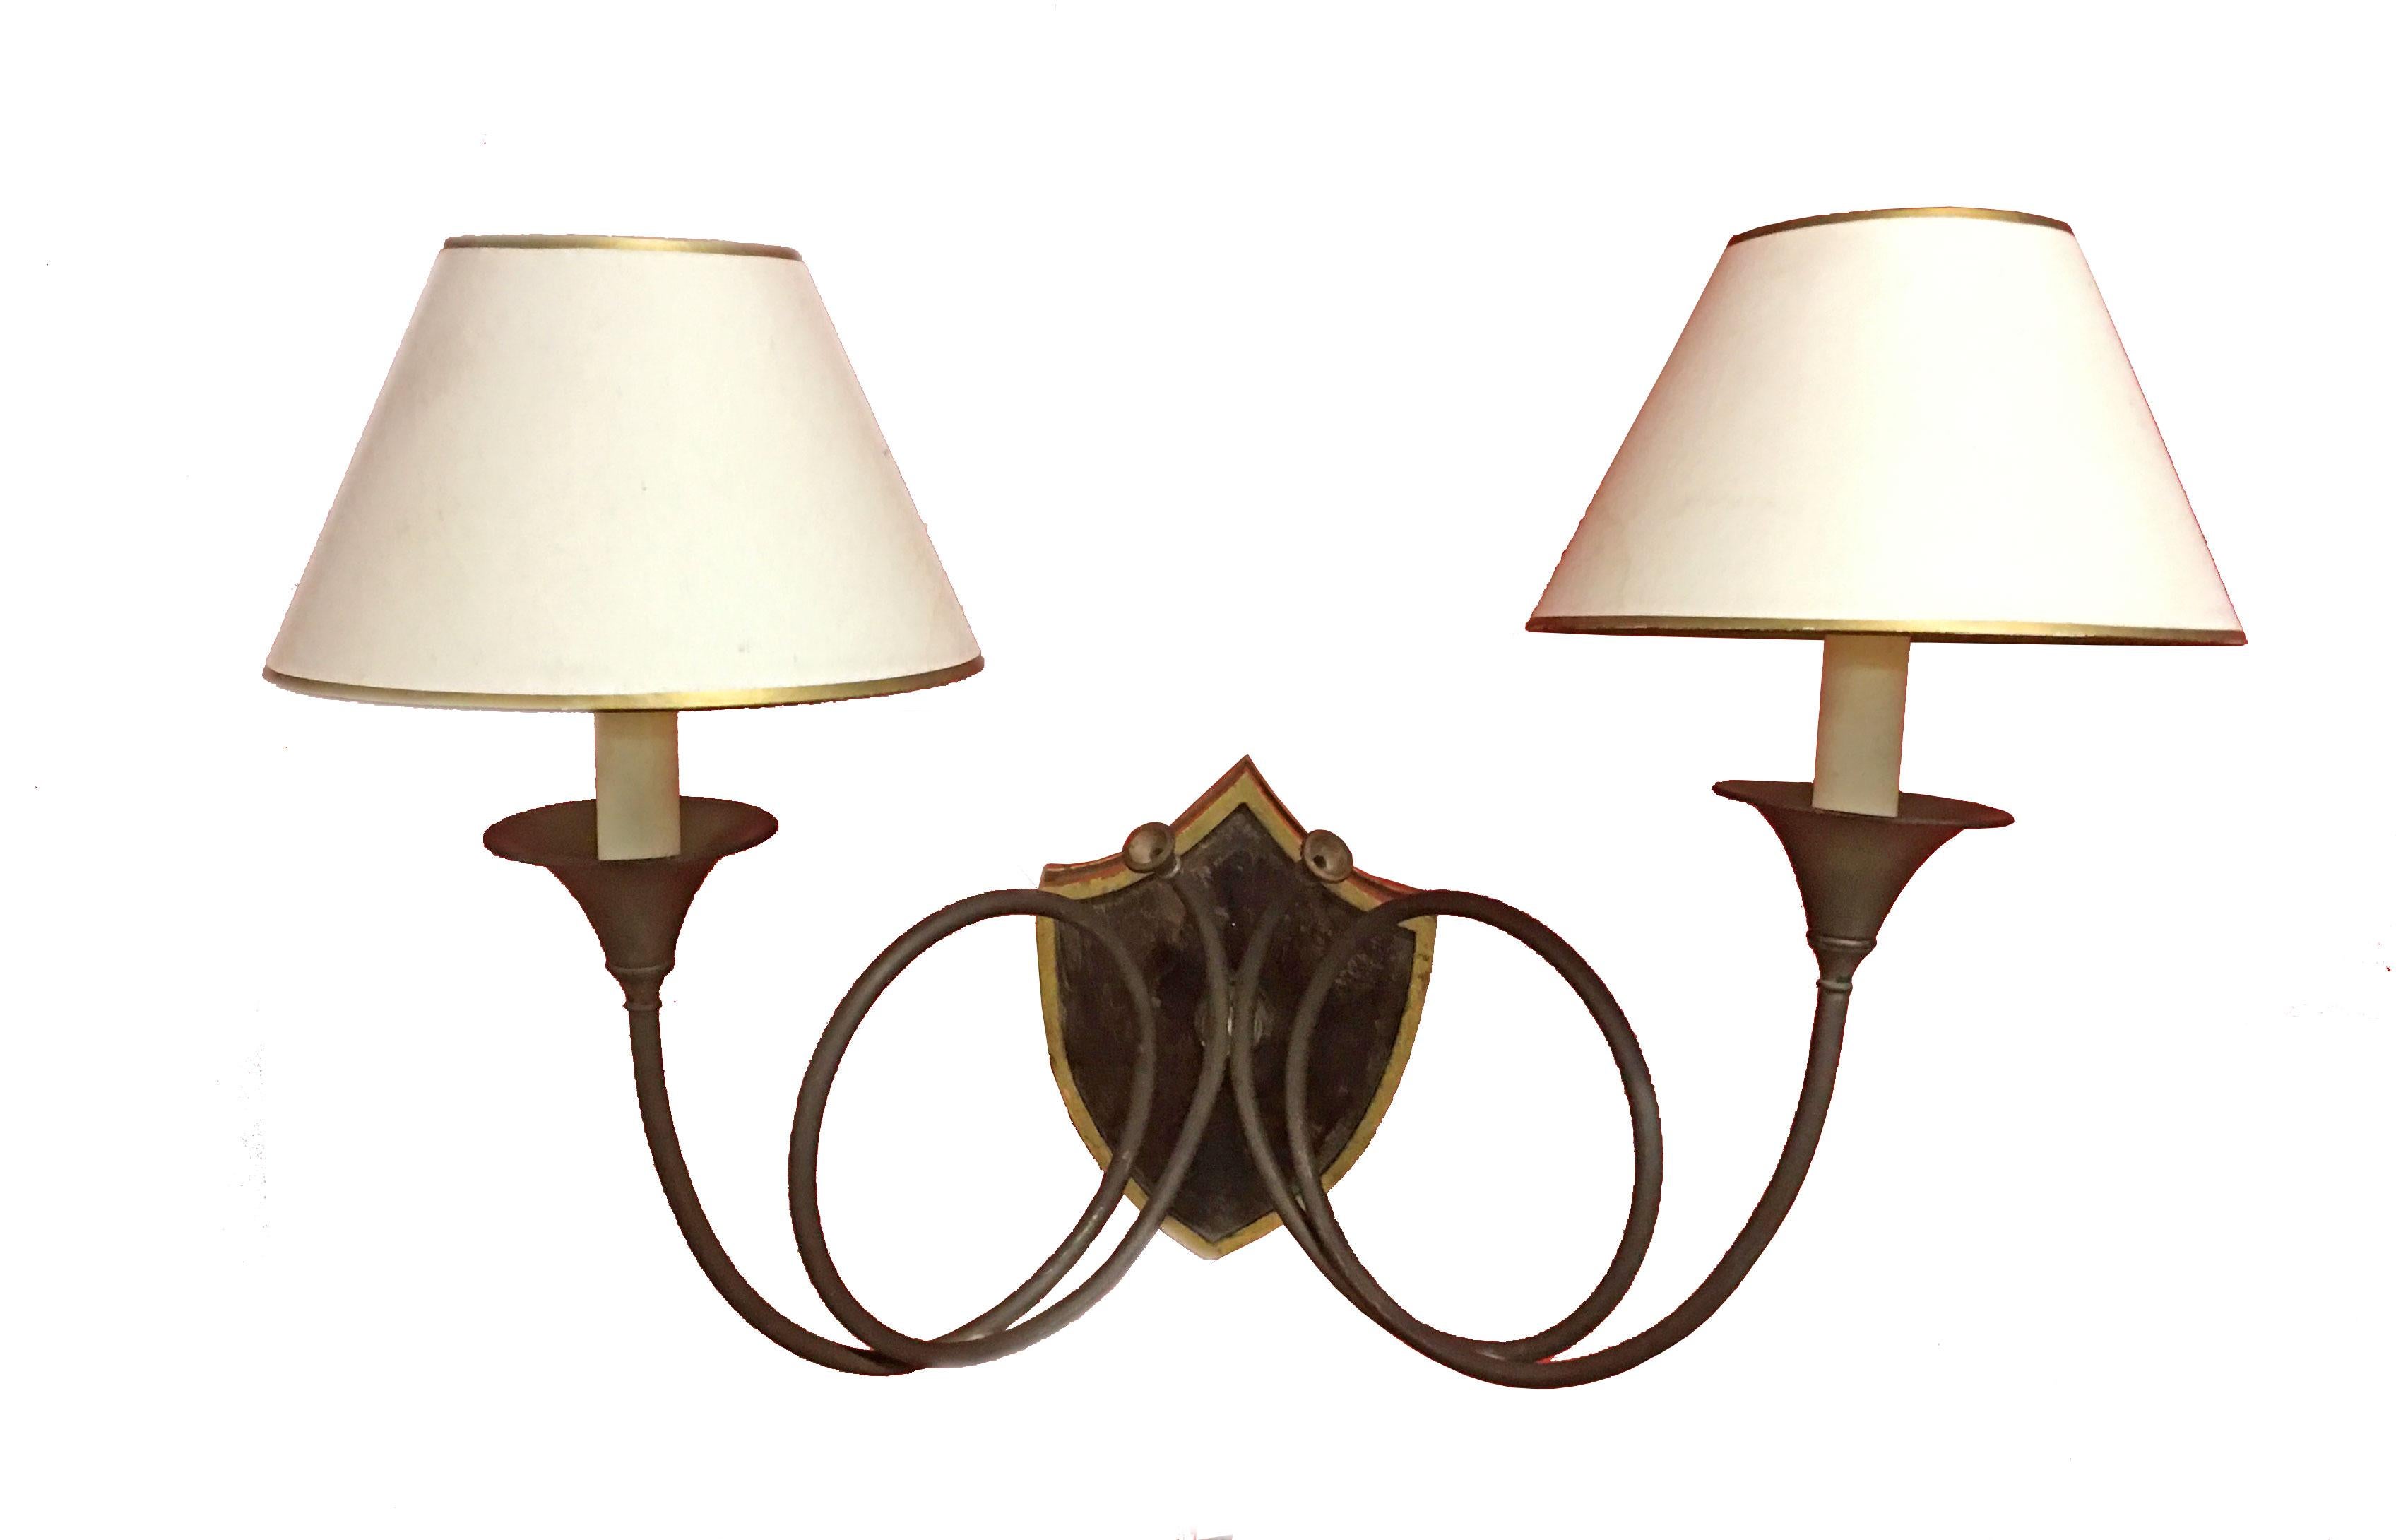 4 large neoclassic Art Deco sconces with hunting horn decor, in bronze and mahogany circa 1940
All lampshades are in good condition.